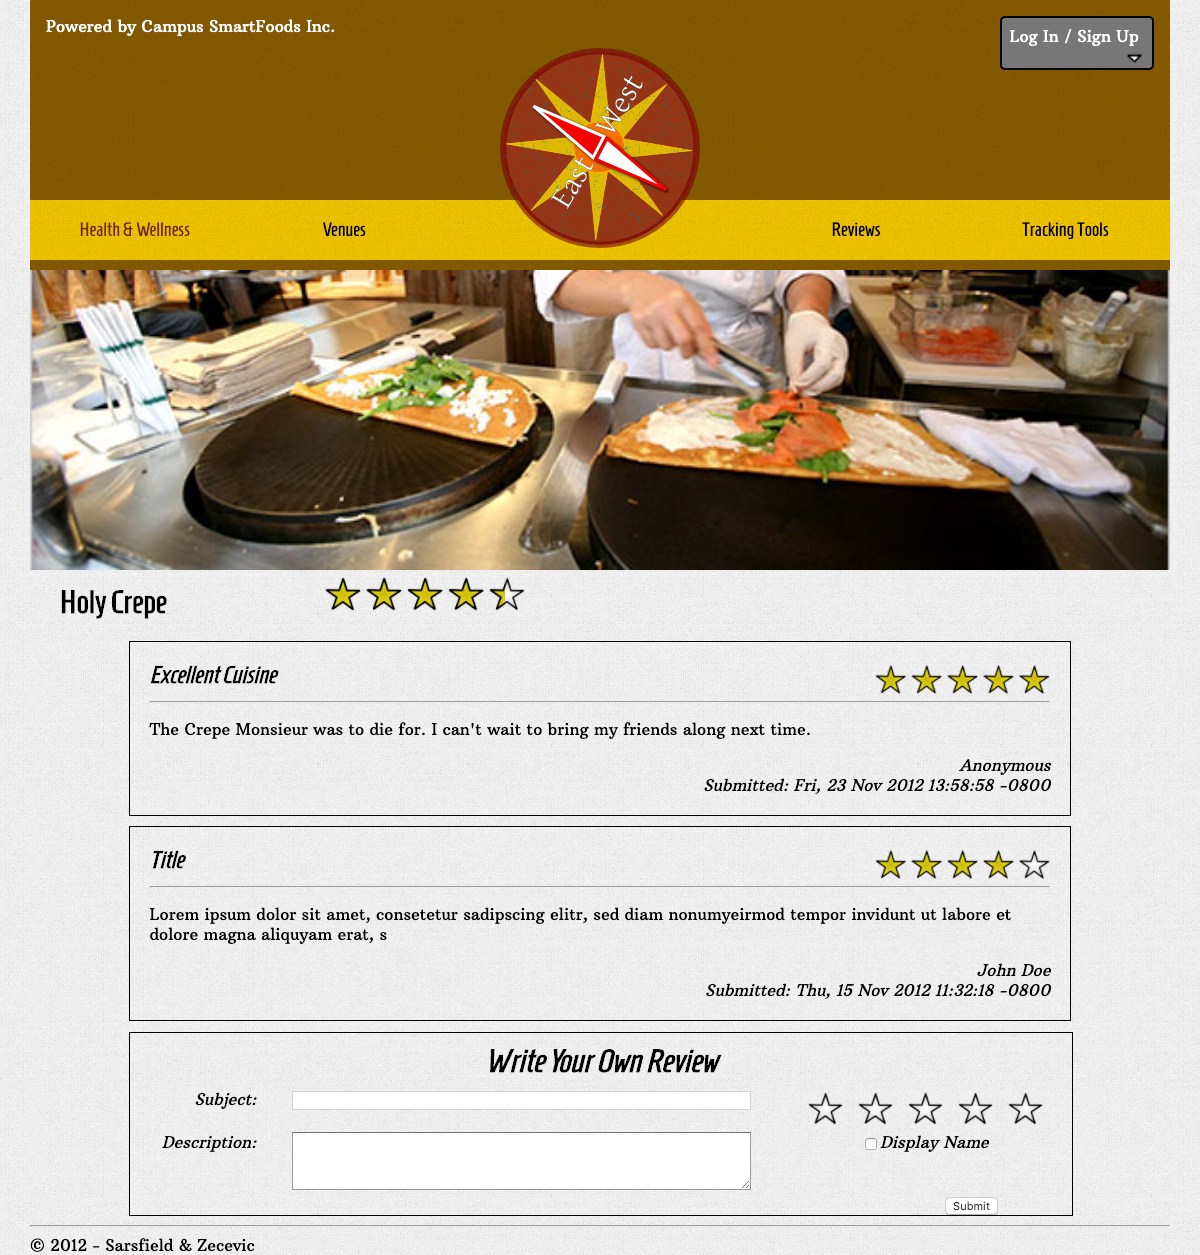 Campus Smart Foods - Reviews Page